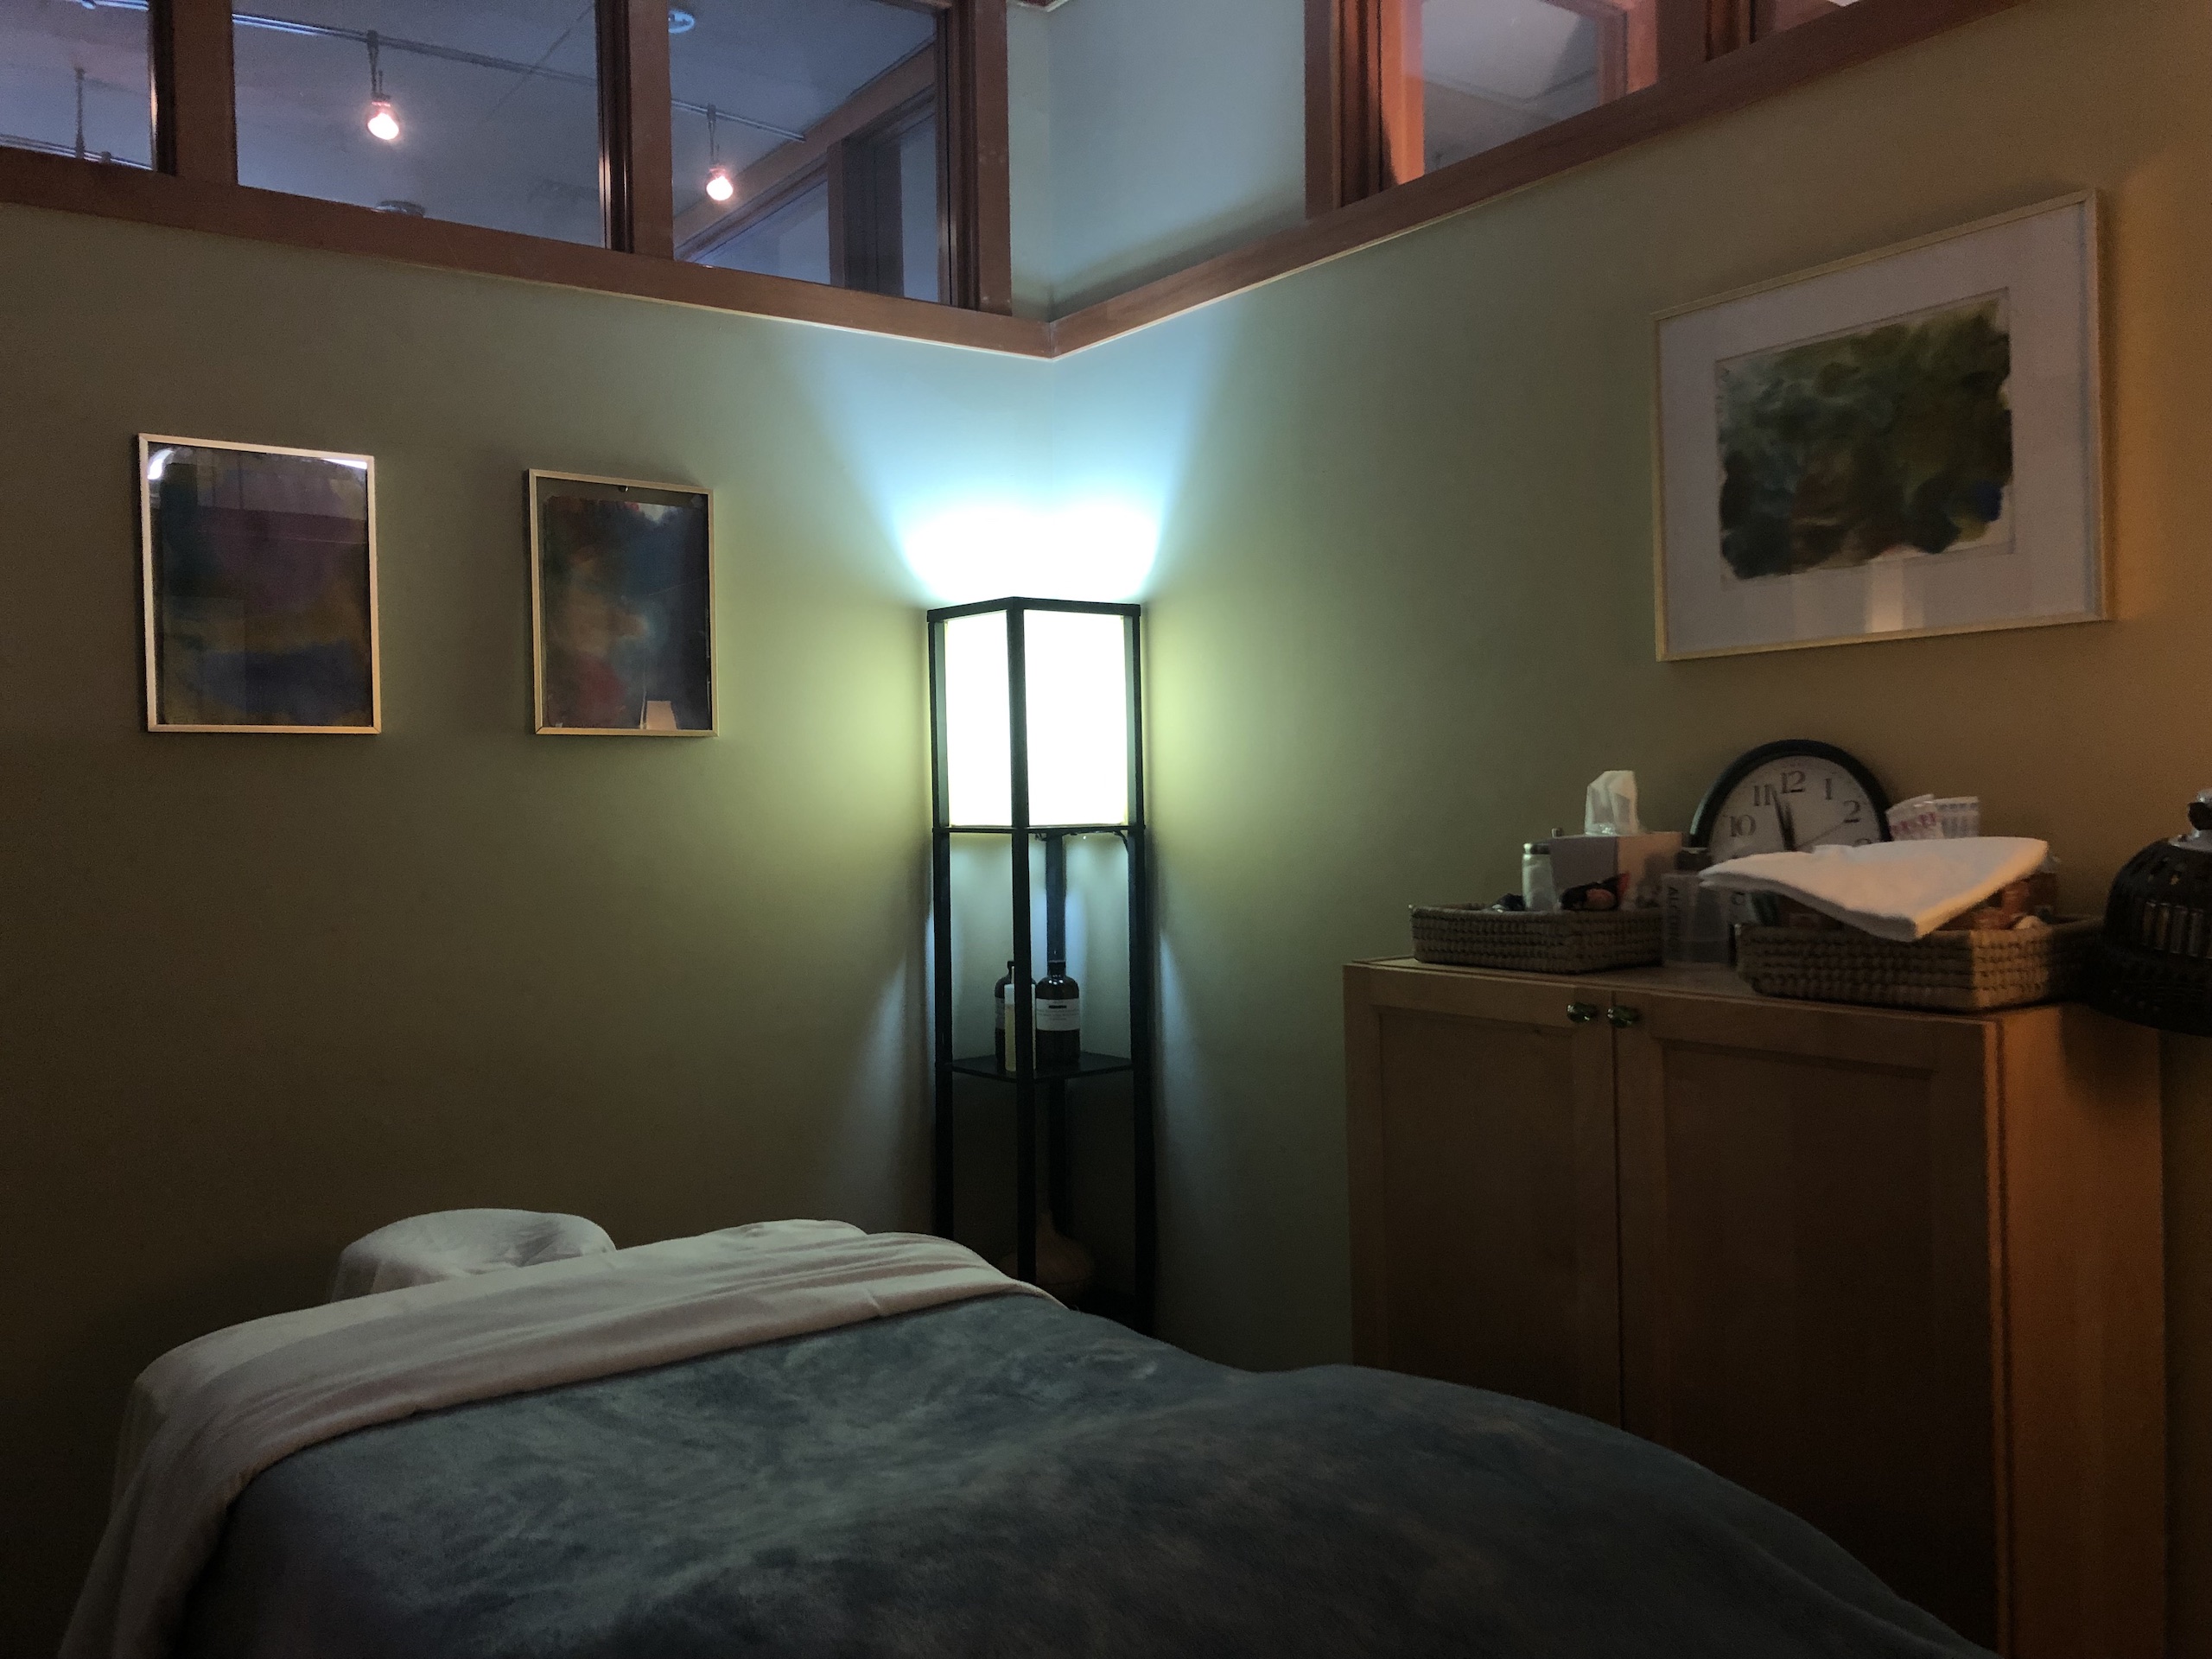 Massage room with lamp and windows at top of room